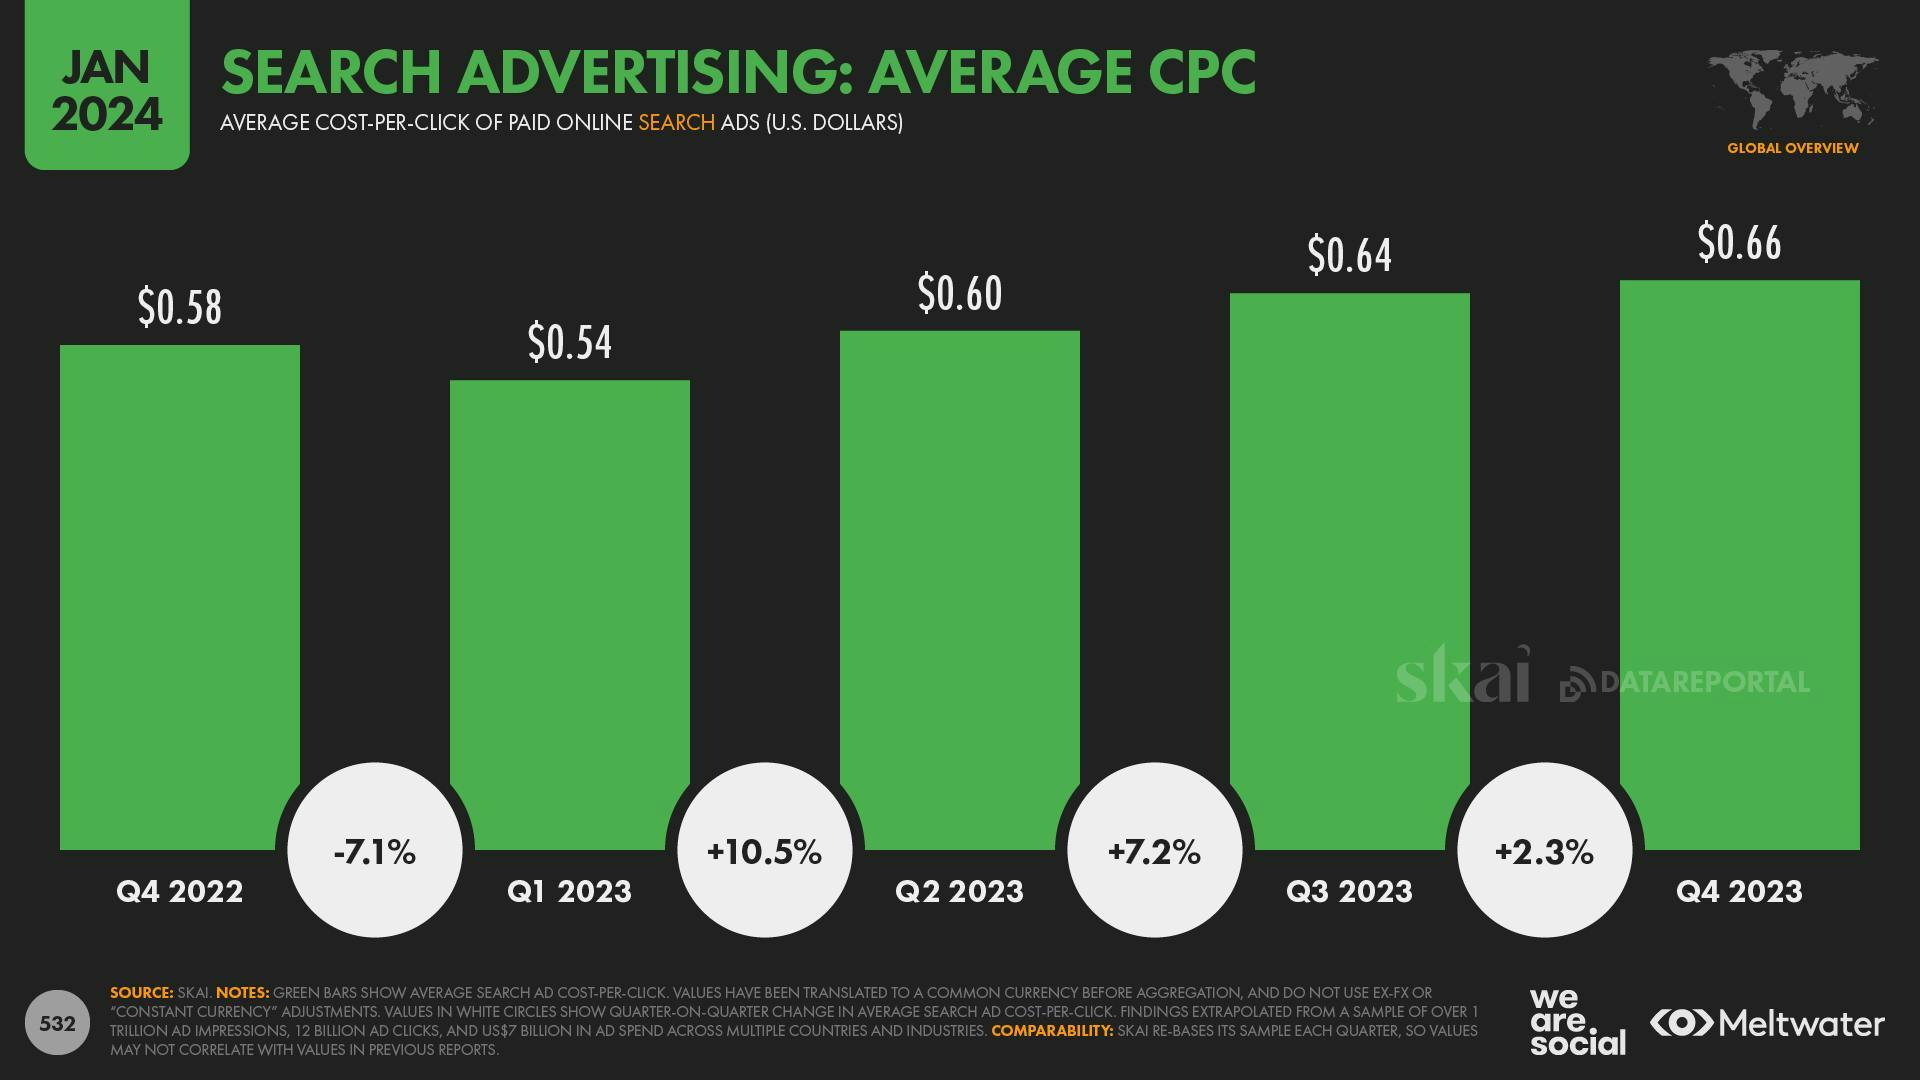 Search advertising: Average CPC